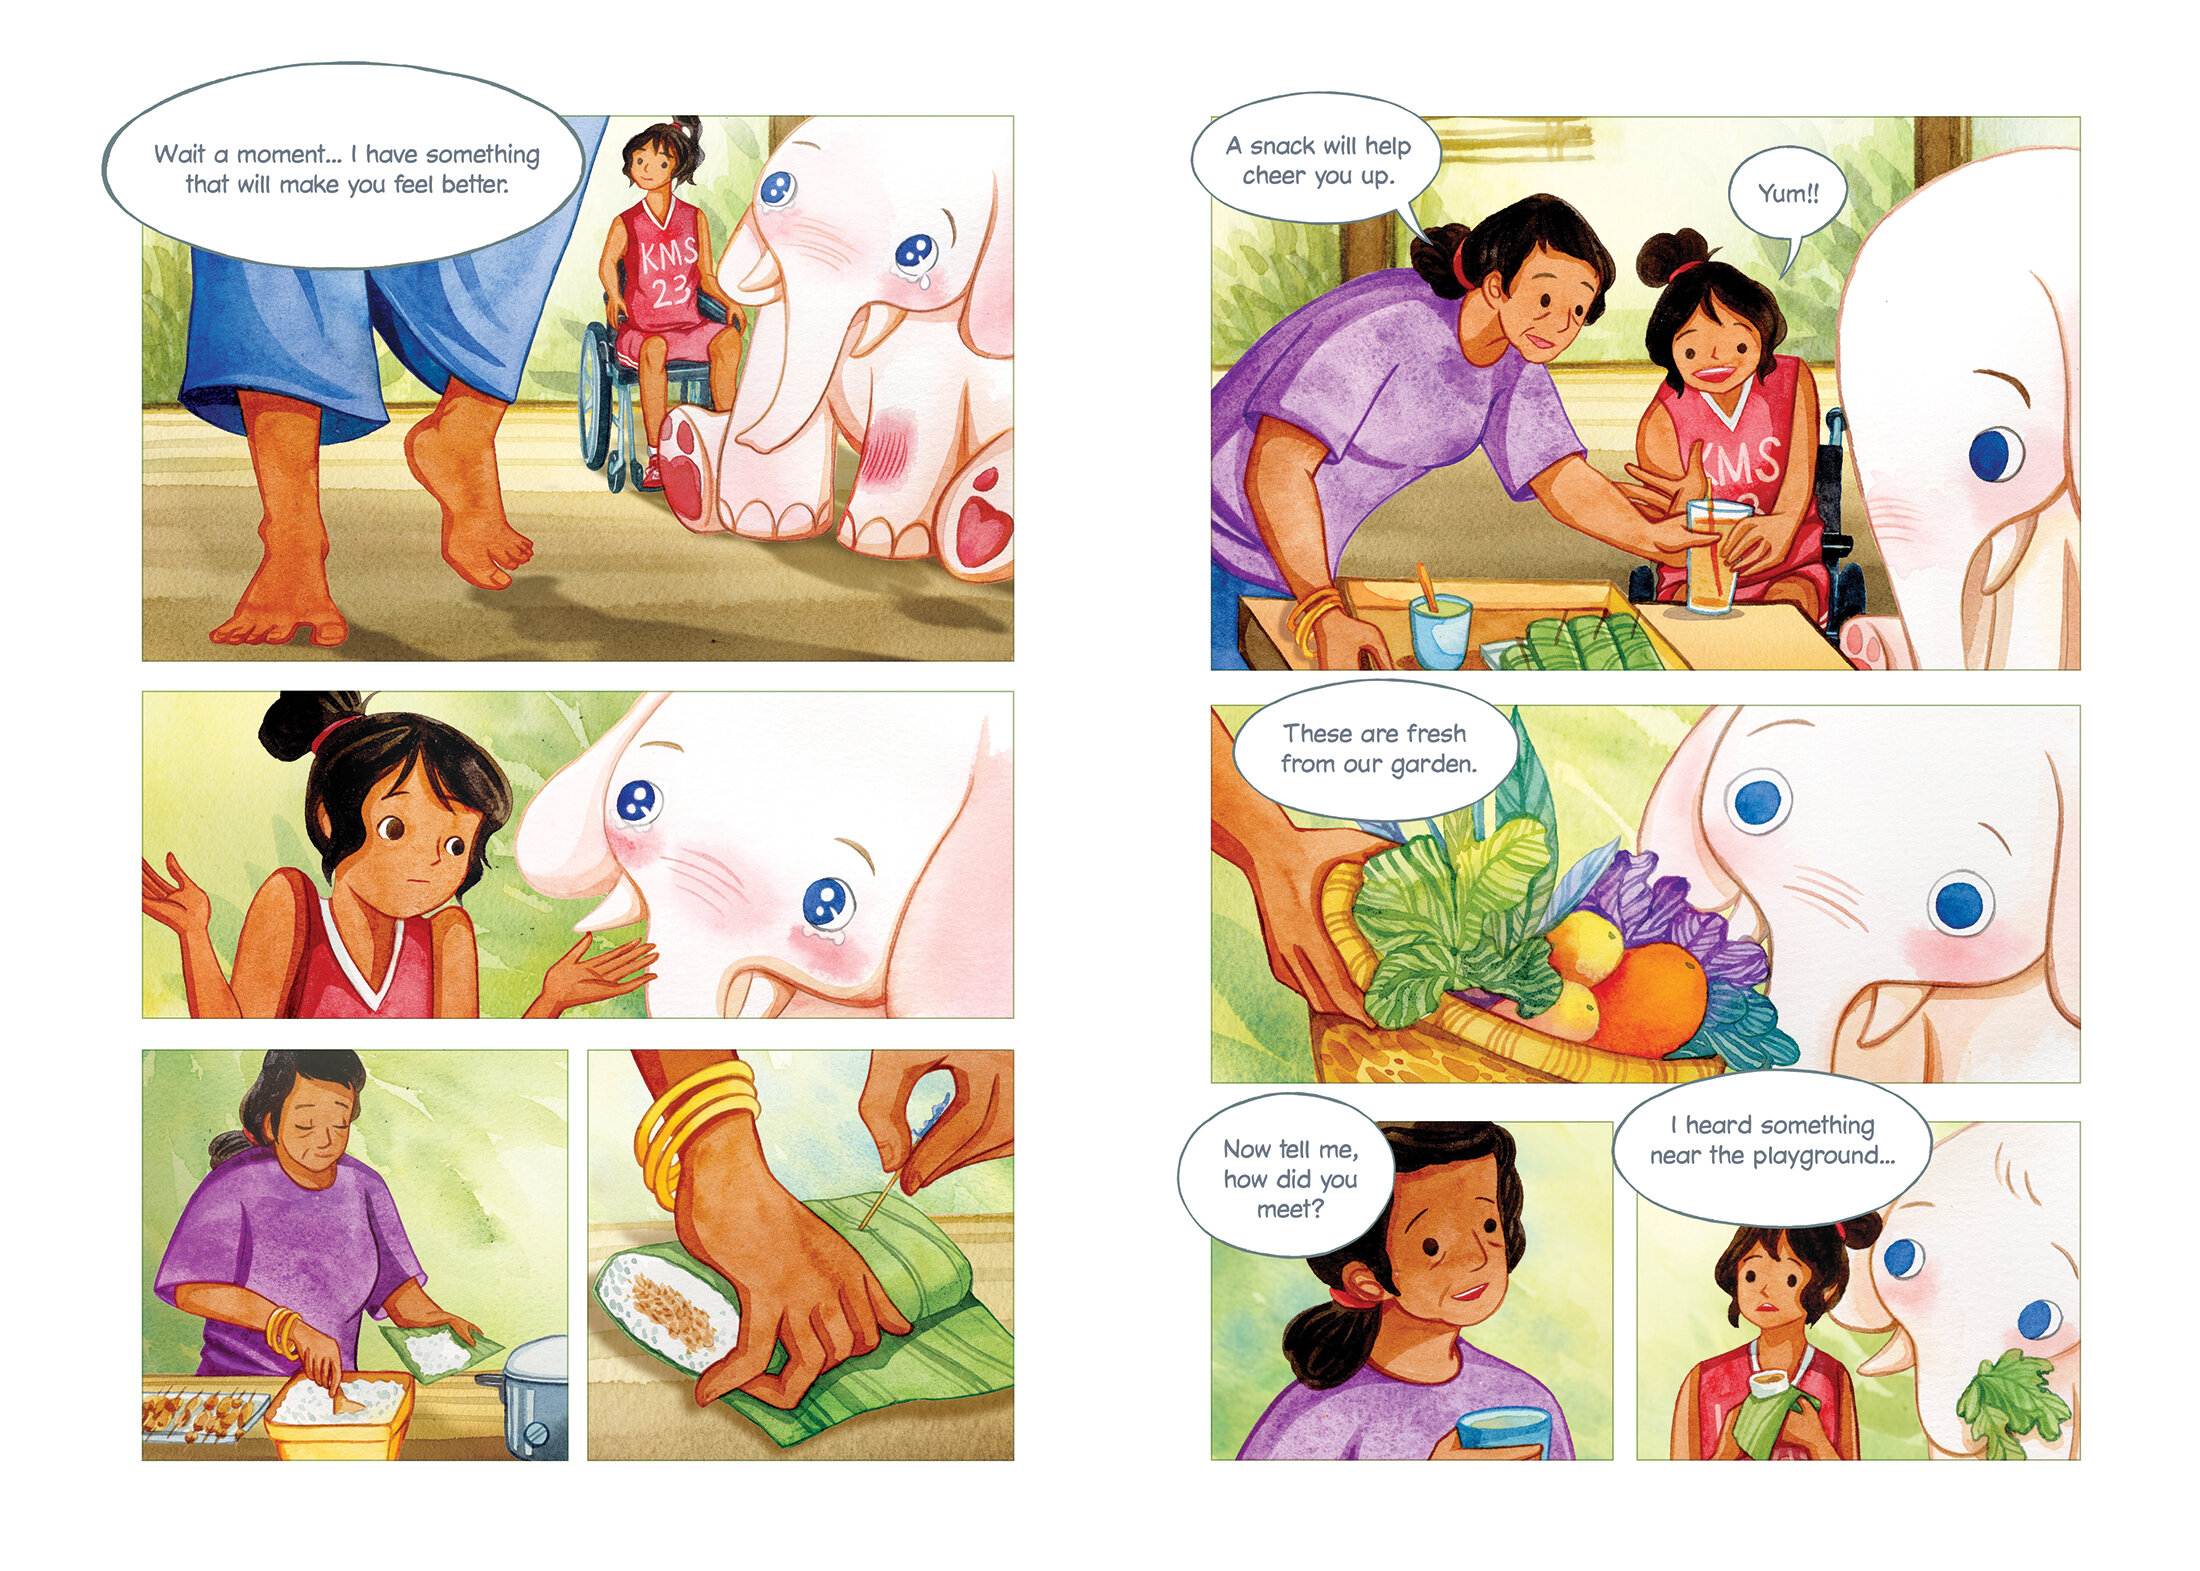 Excerpt from the book. Illustrations and text depict protagonists Jordan and Marshmallow entering Jordan's home, being cared for by her adult. Jordan's adult says: "Wait a moment... I have something that will make you feel better. A snack will help cheer you up." Jordan responds: "Yum!" Her adult explains: "These are fresh from our garden. Now tell me, how did you meet?" Jordan begins: "I heard something near the playground...."